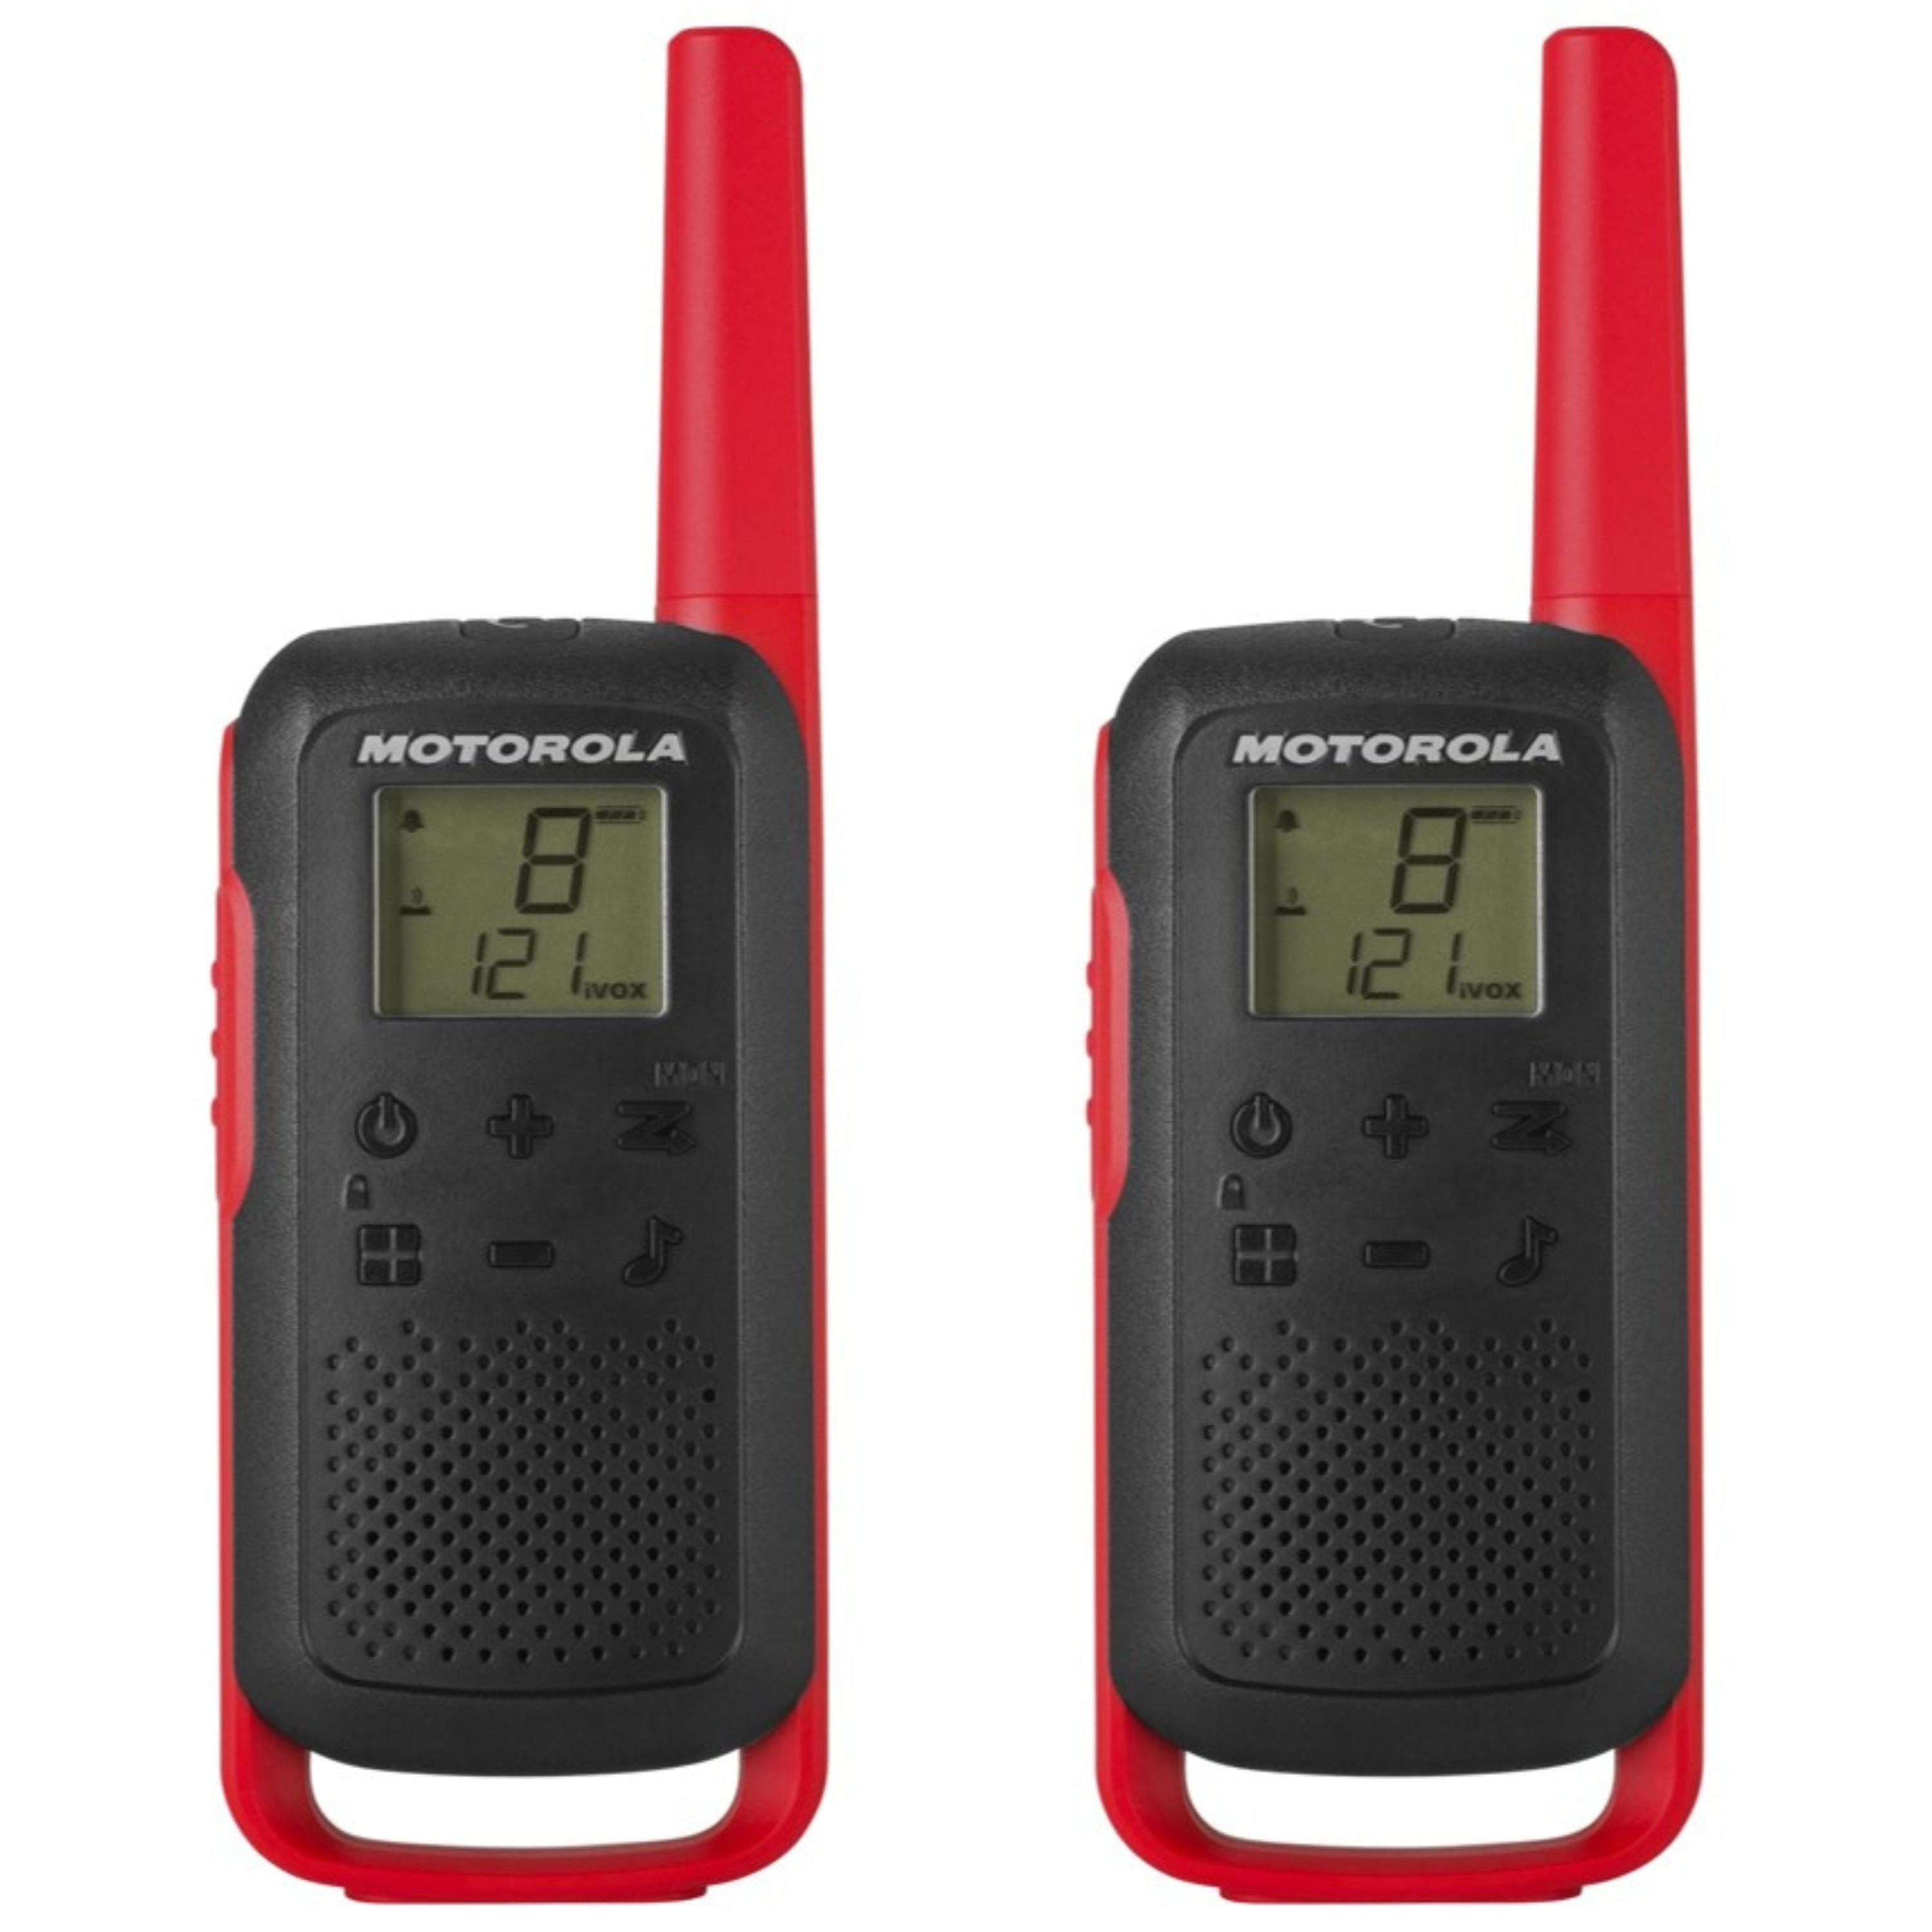 "T210 Talkabout" Two-way radios